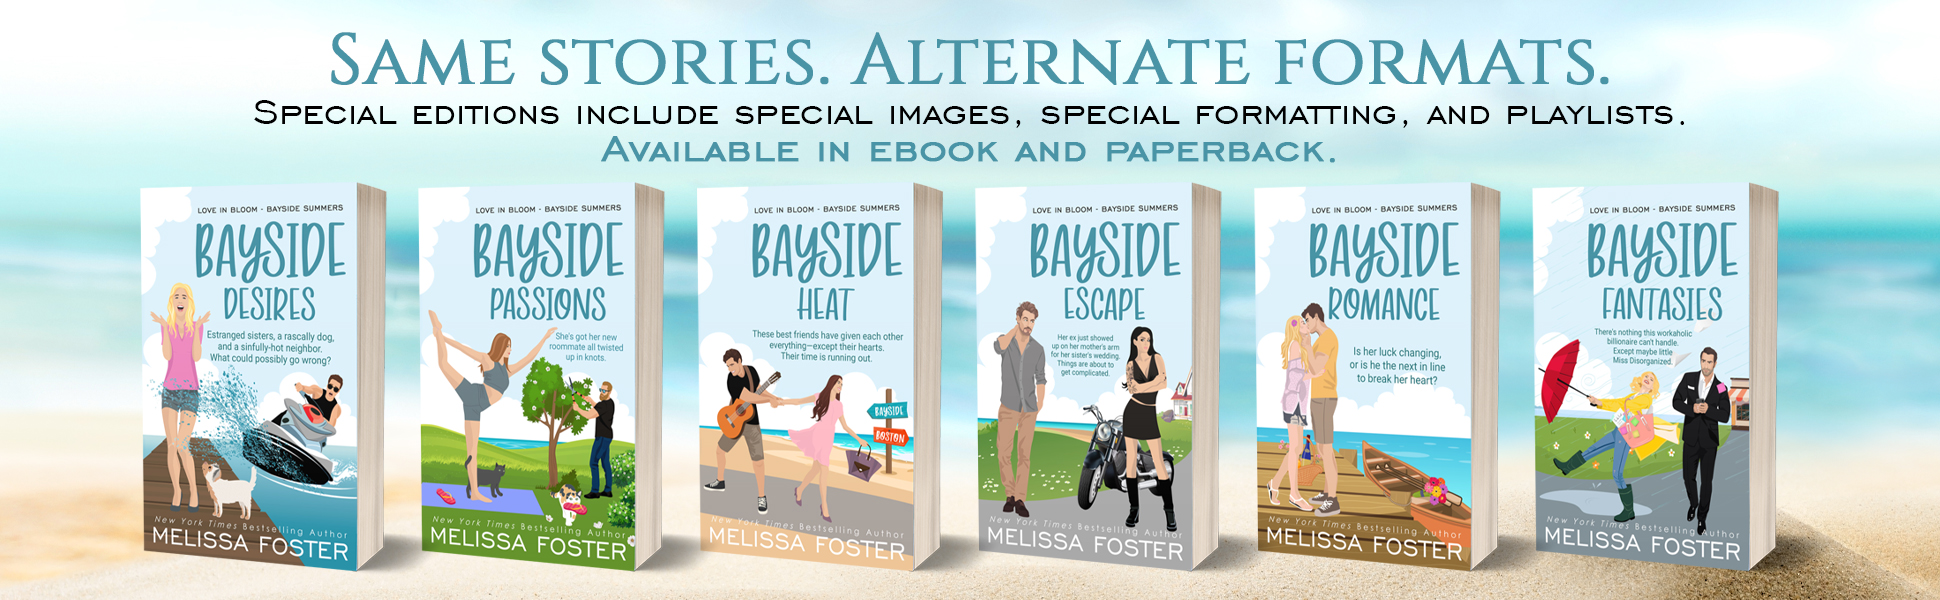 Bayside Summers Special Editions by Melissa Foster